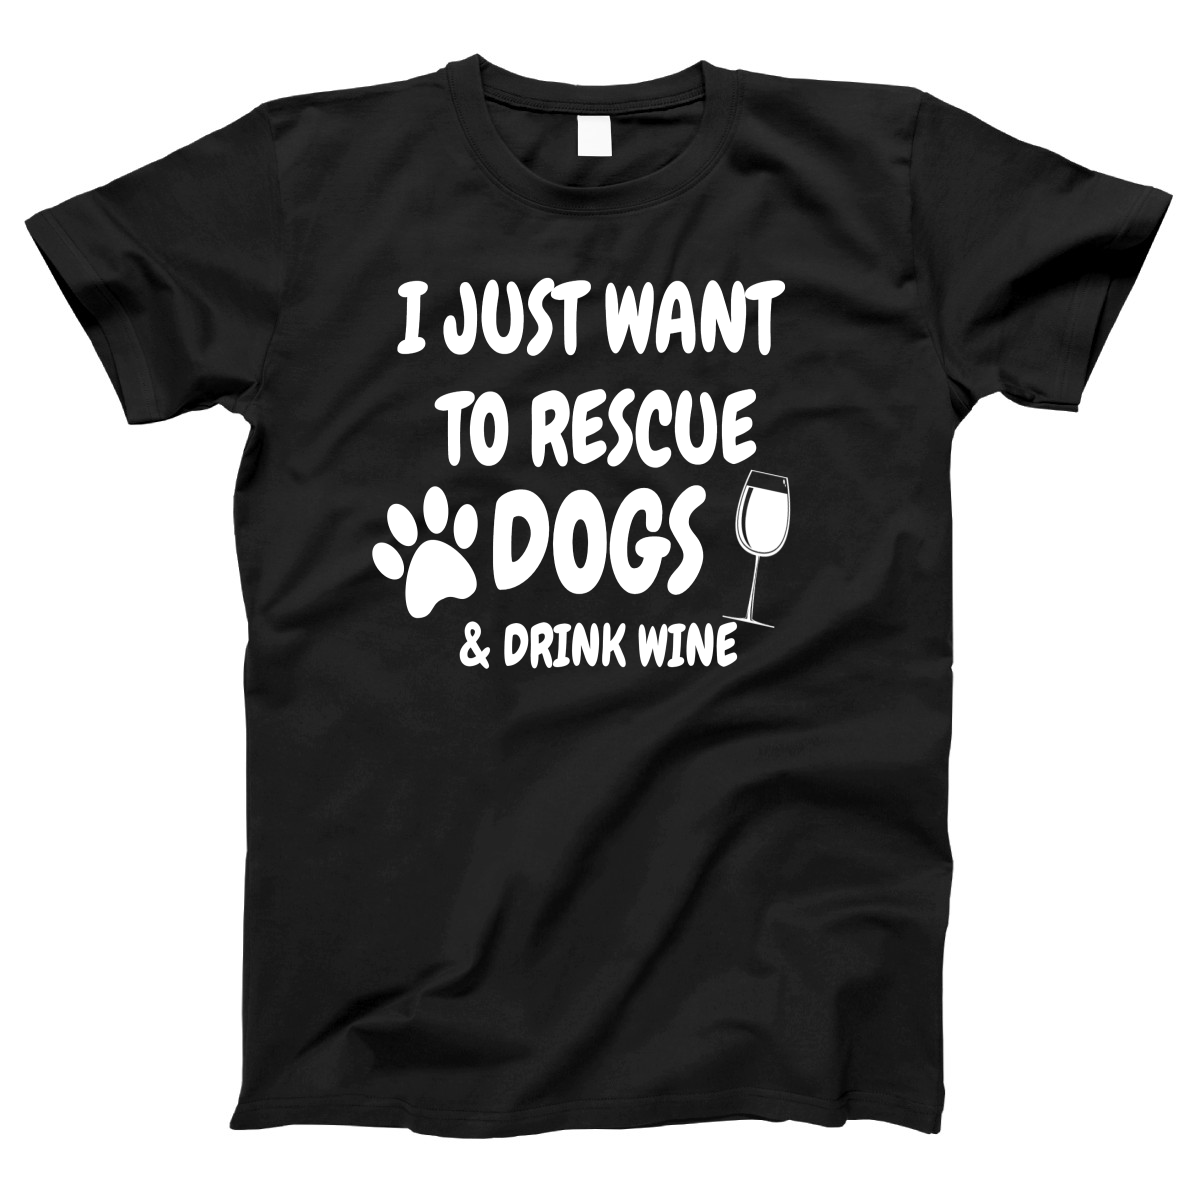 Dogs and Drink Wine Women's T-shirt | Black